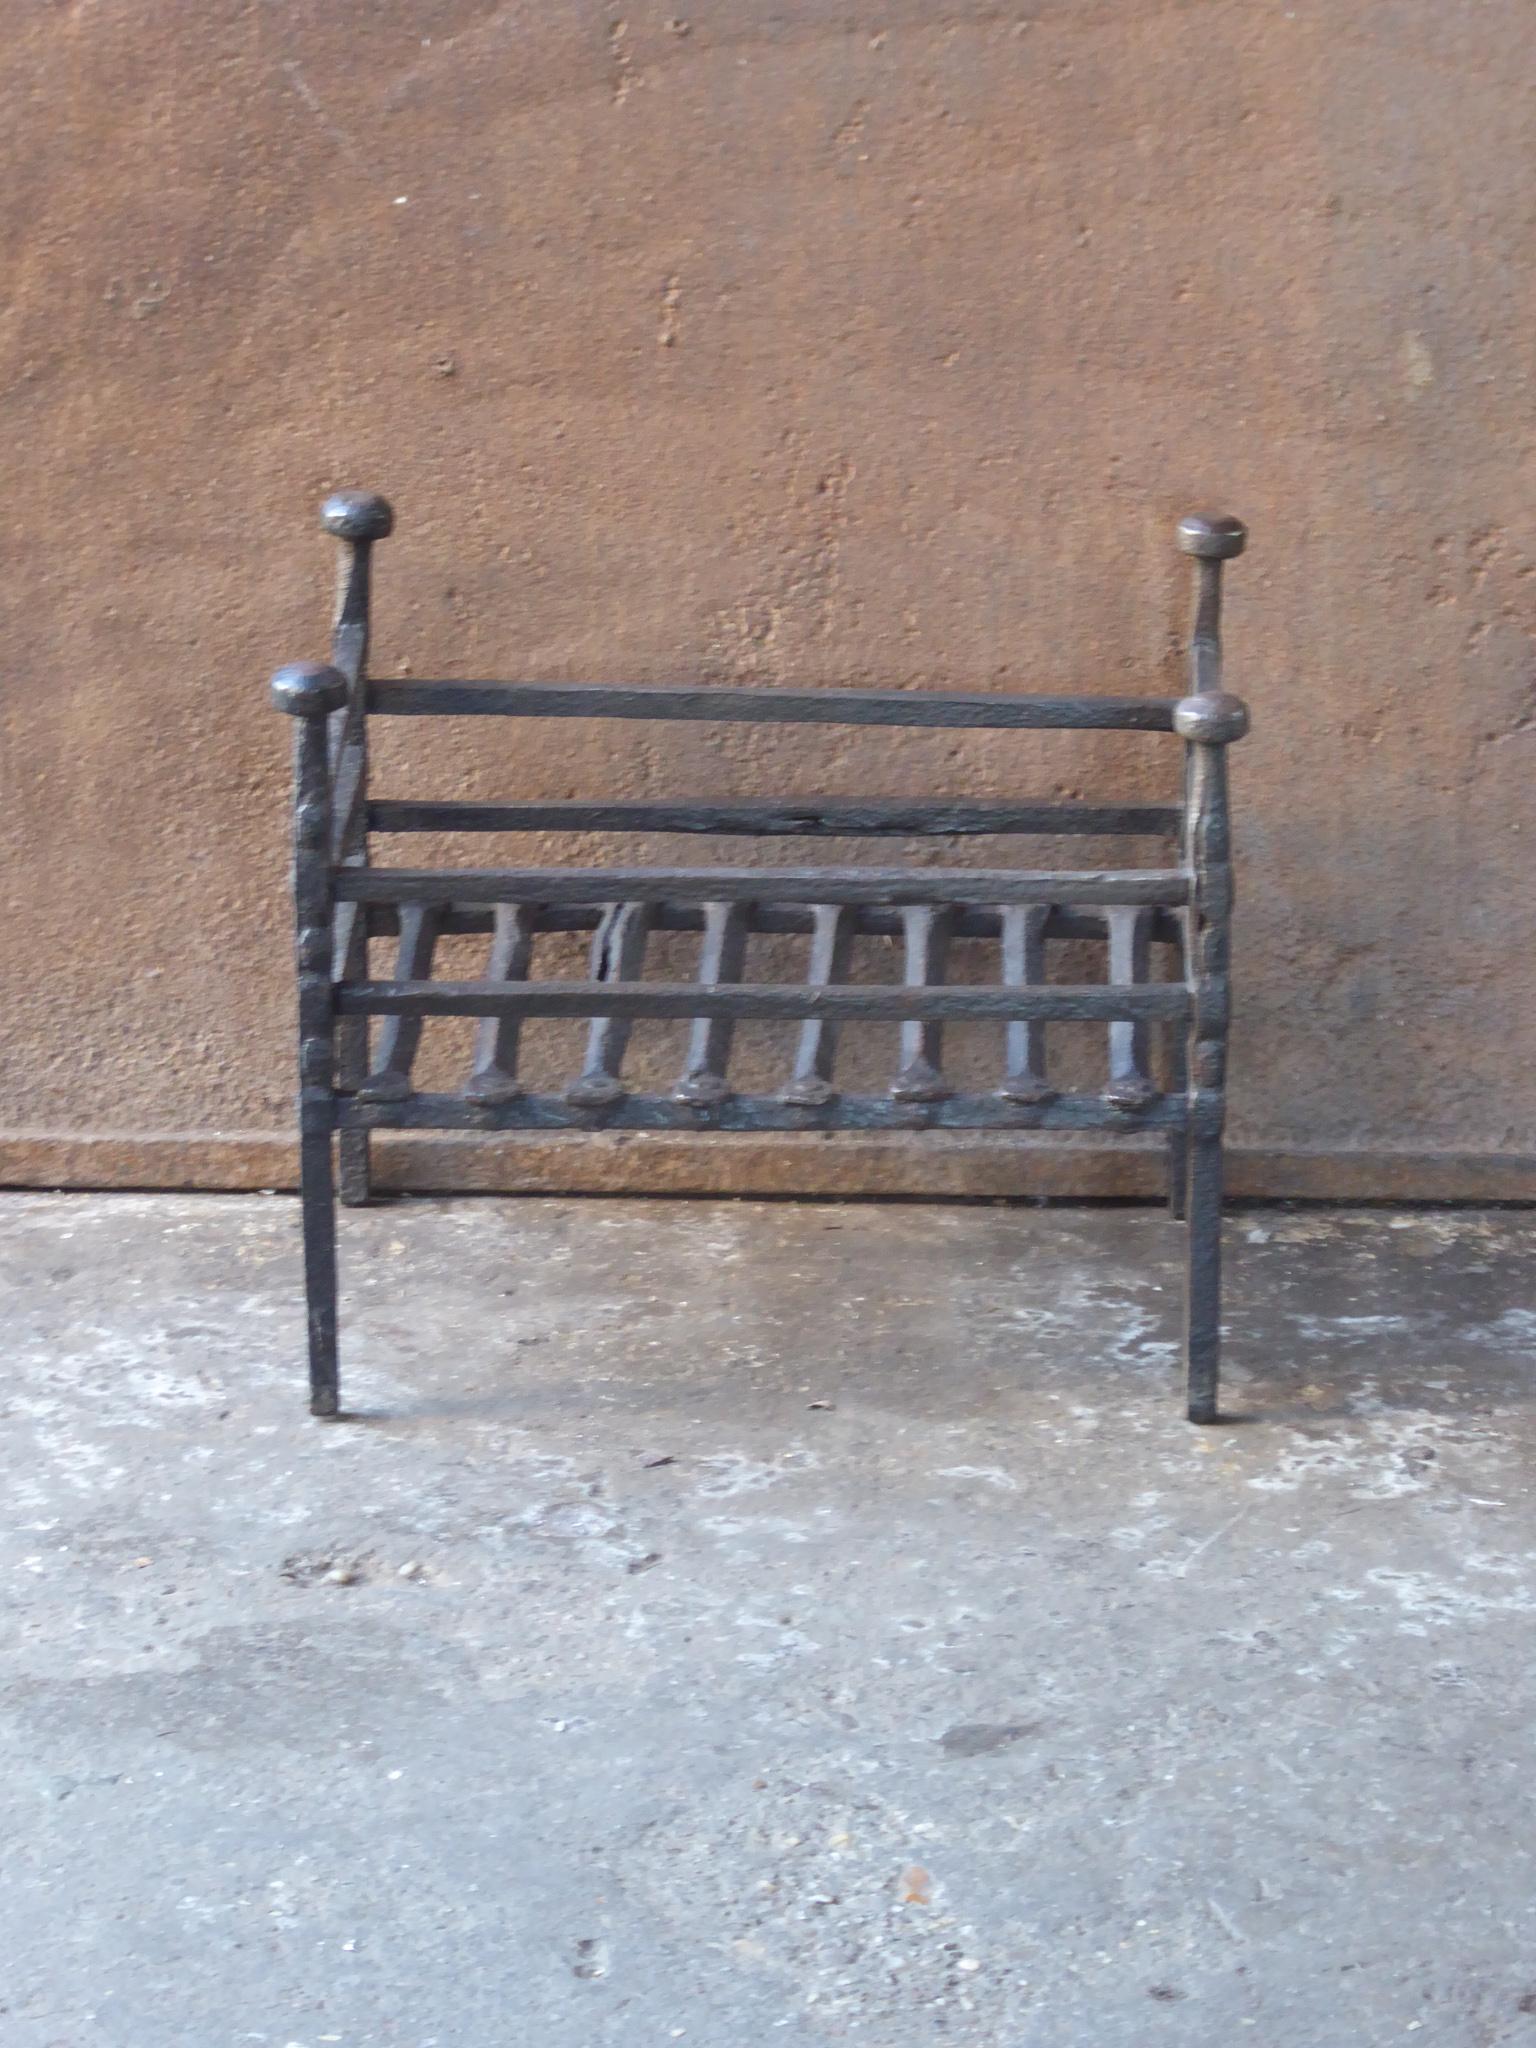 18th-19th century Dutch neoclassical period fireplace grate made of wrought iron. The fireplace grate is in a good condition and is fully functional.